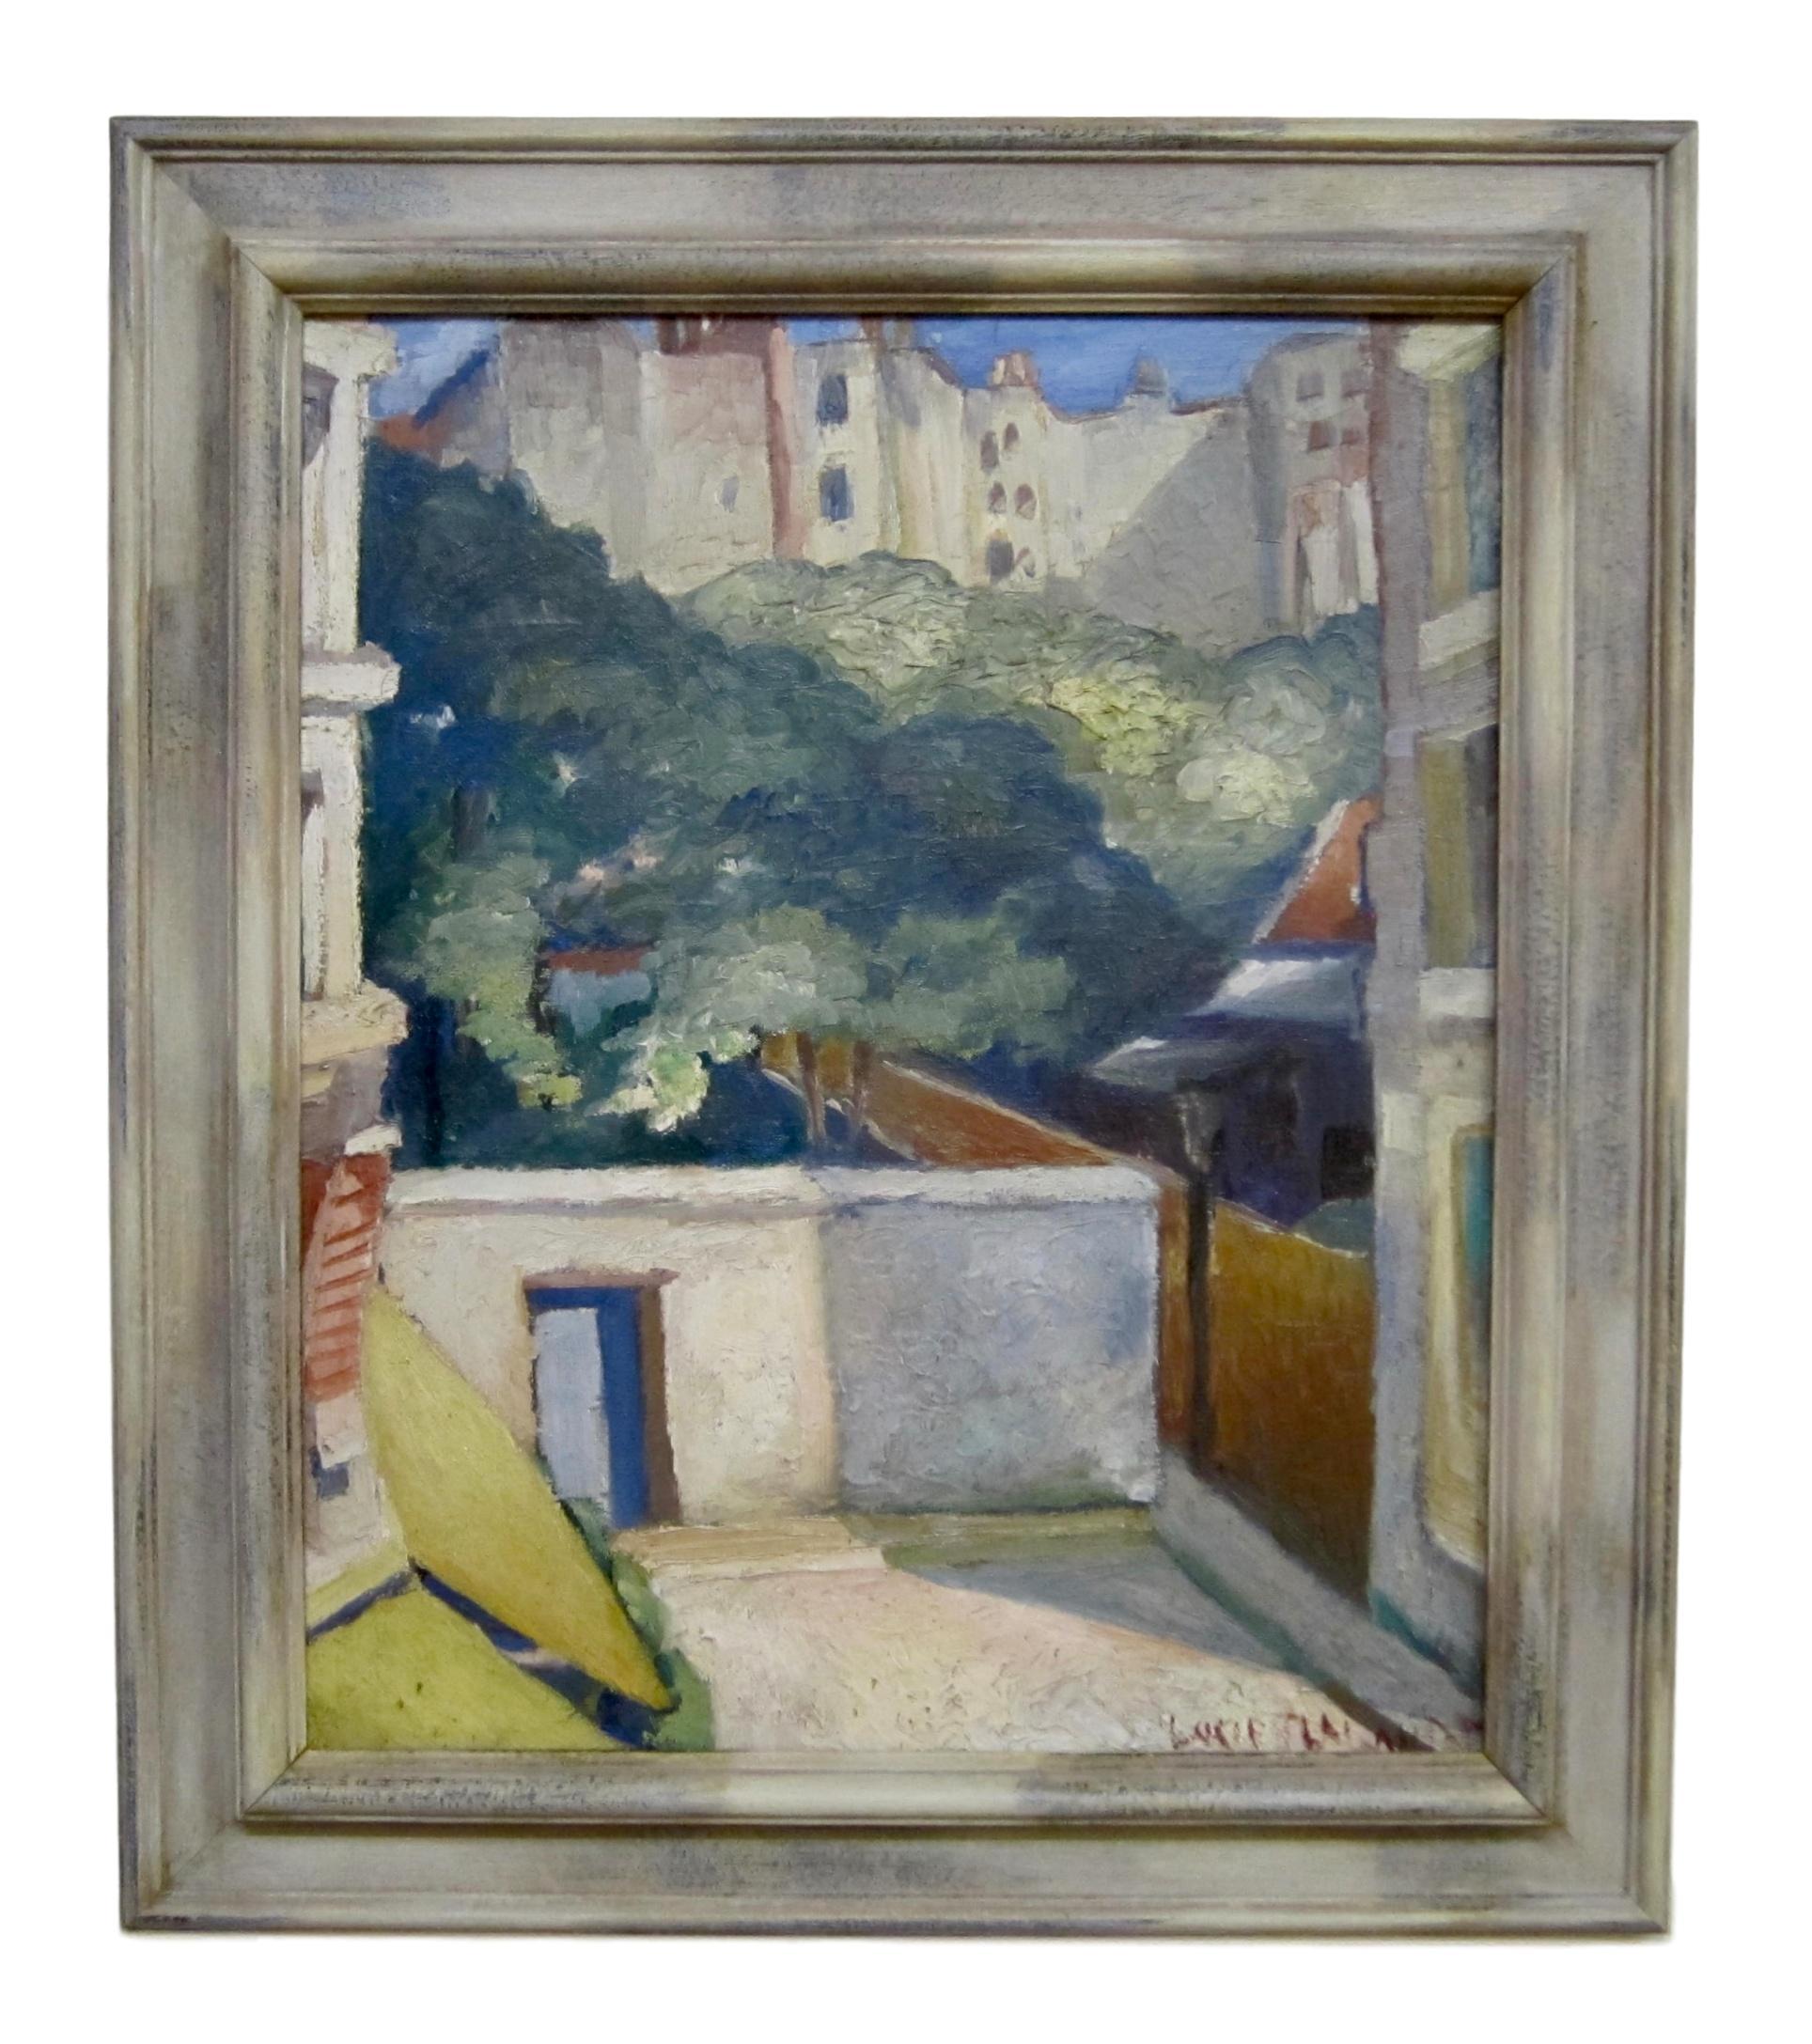 Modernist Oil Painting of a Paris Street Scene Dated 1924 by Lucien Labaudt For Sale 1